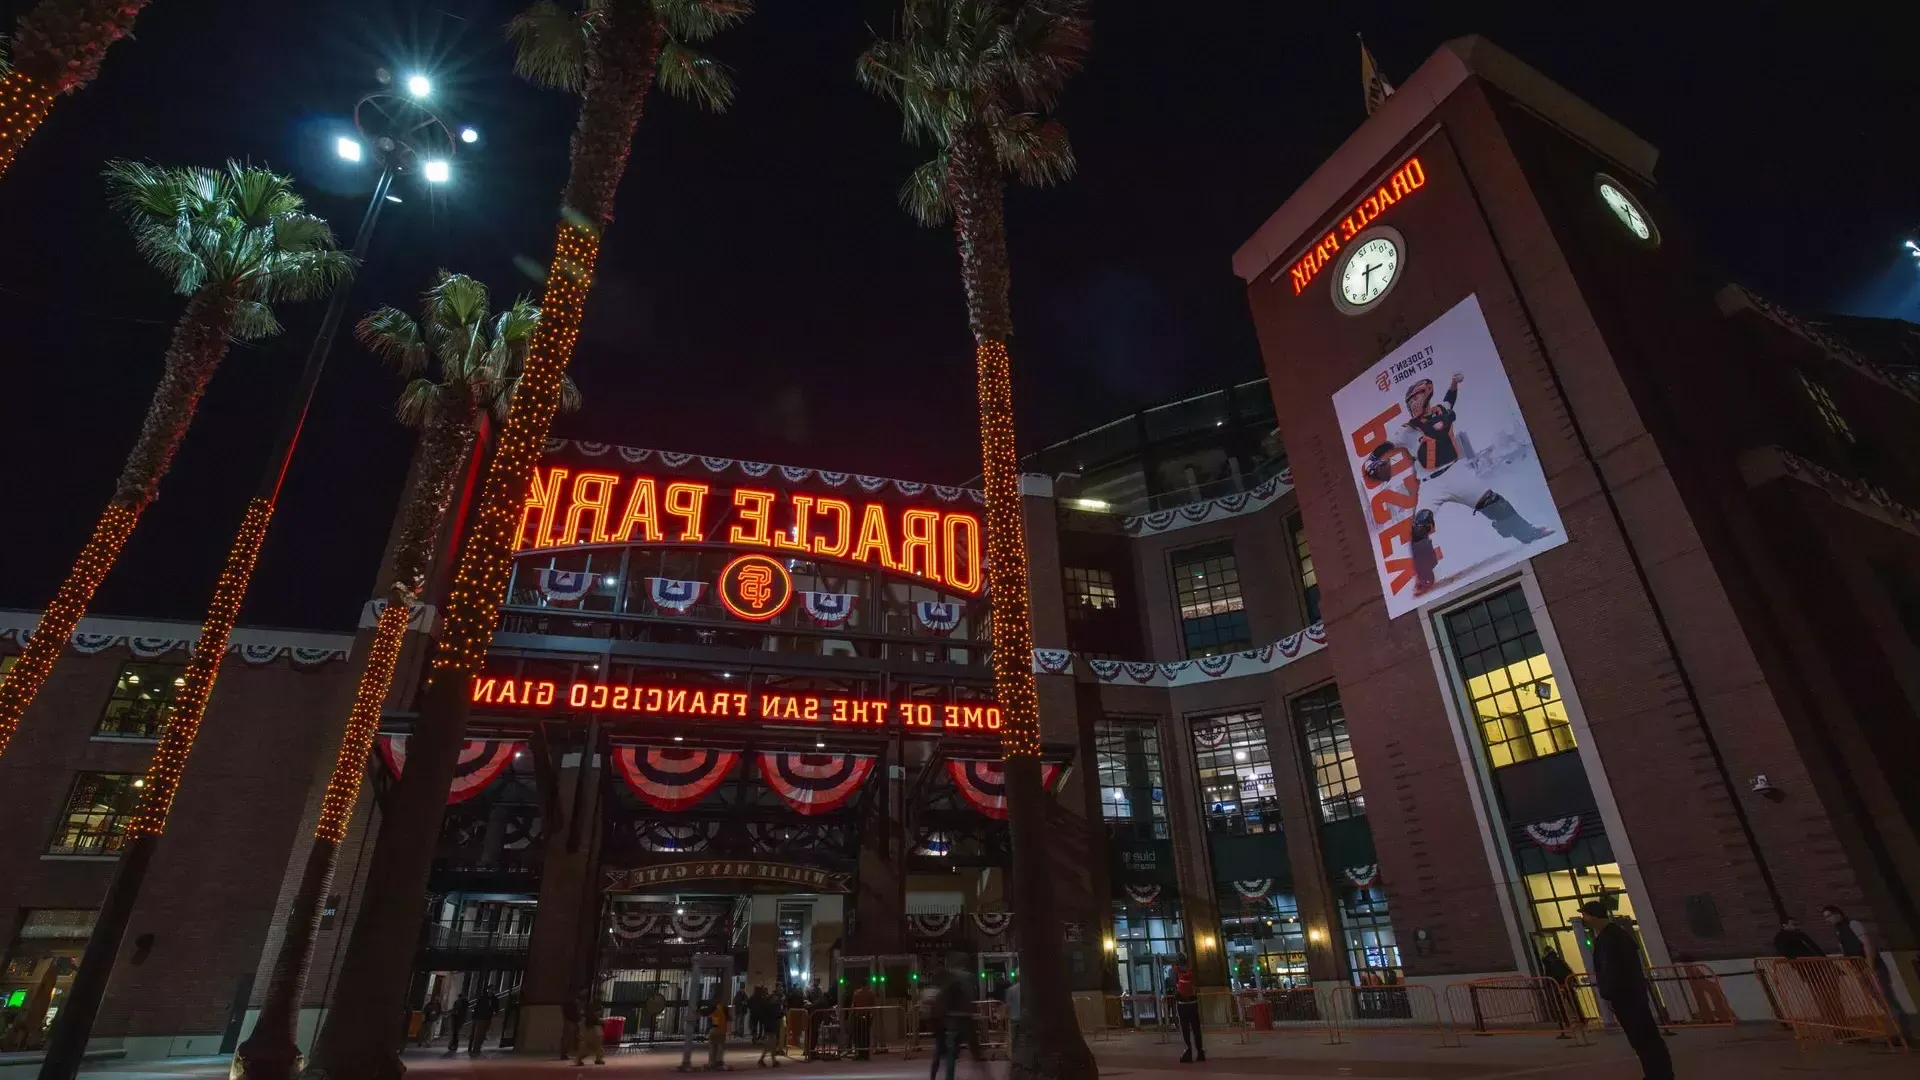 Oracle Willie Mays Plaza公园入口